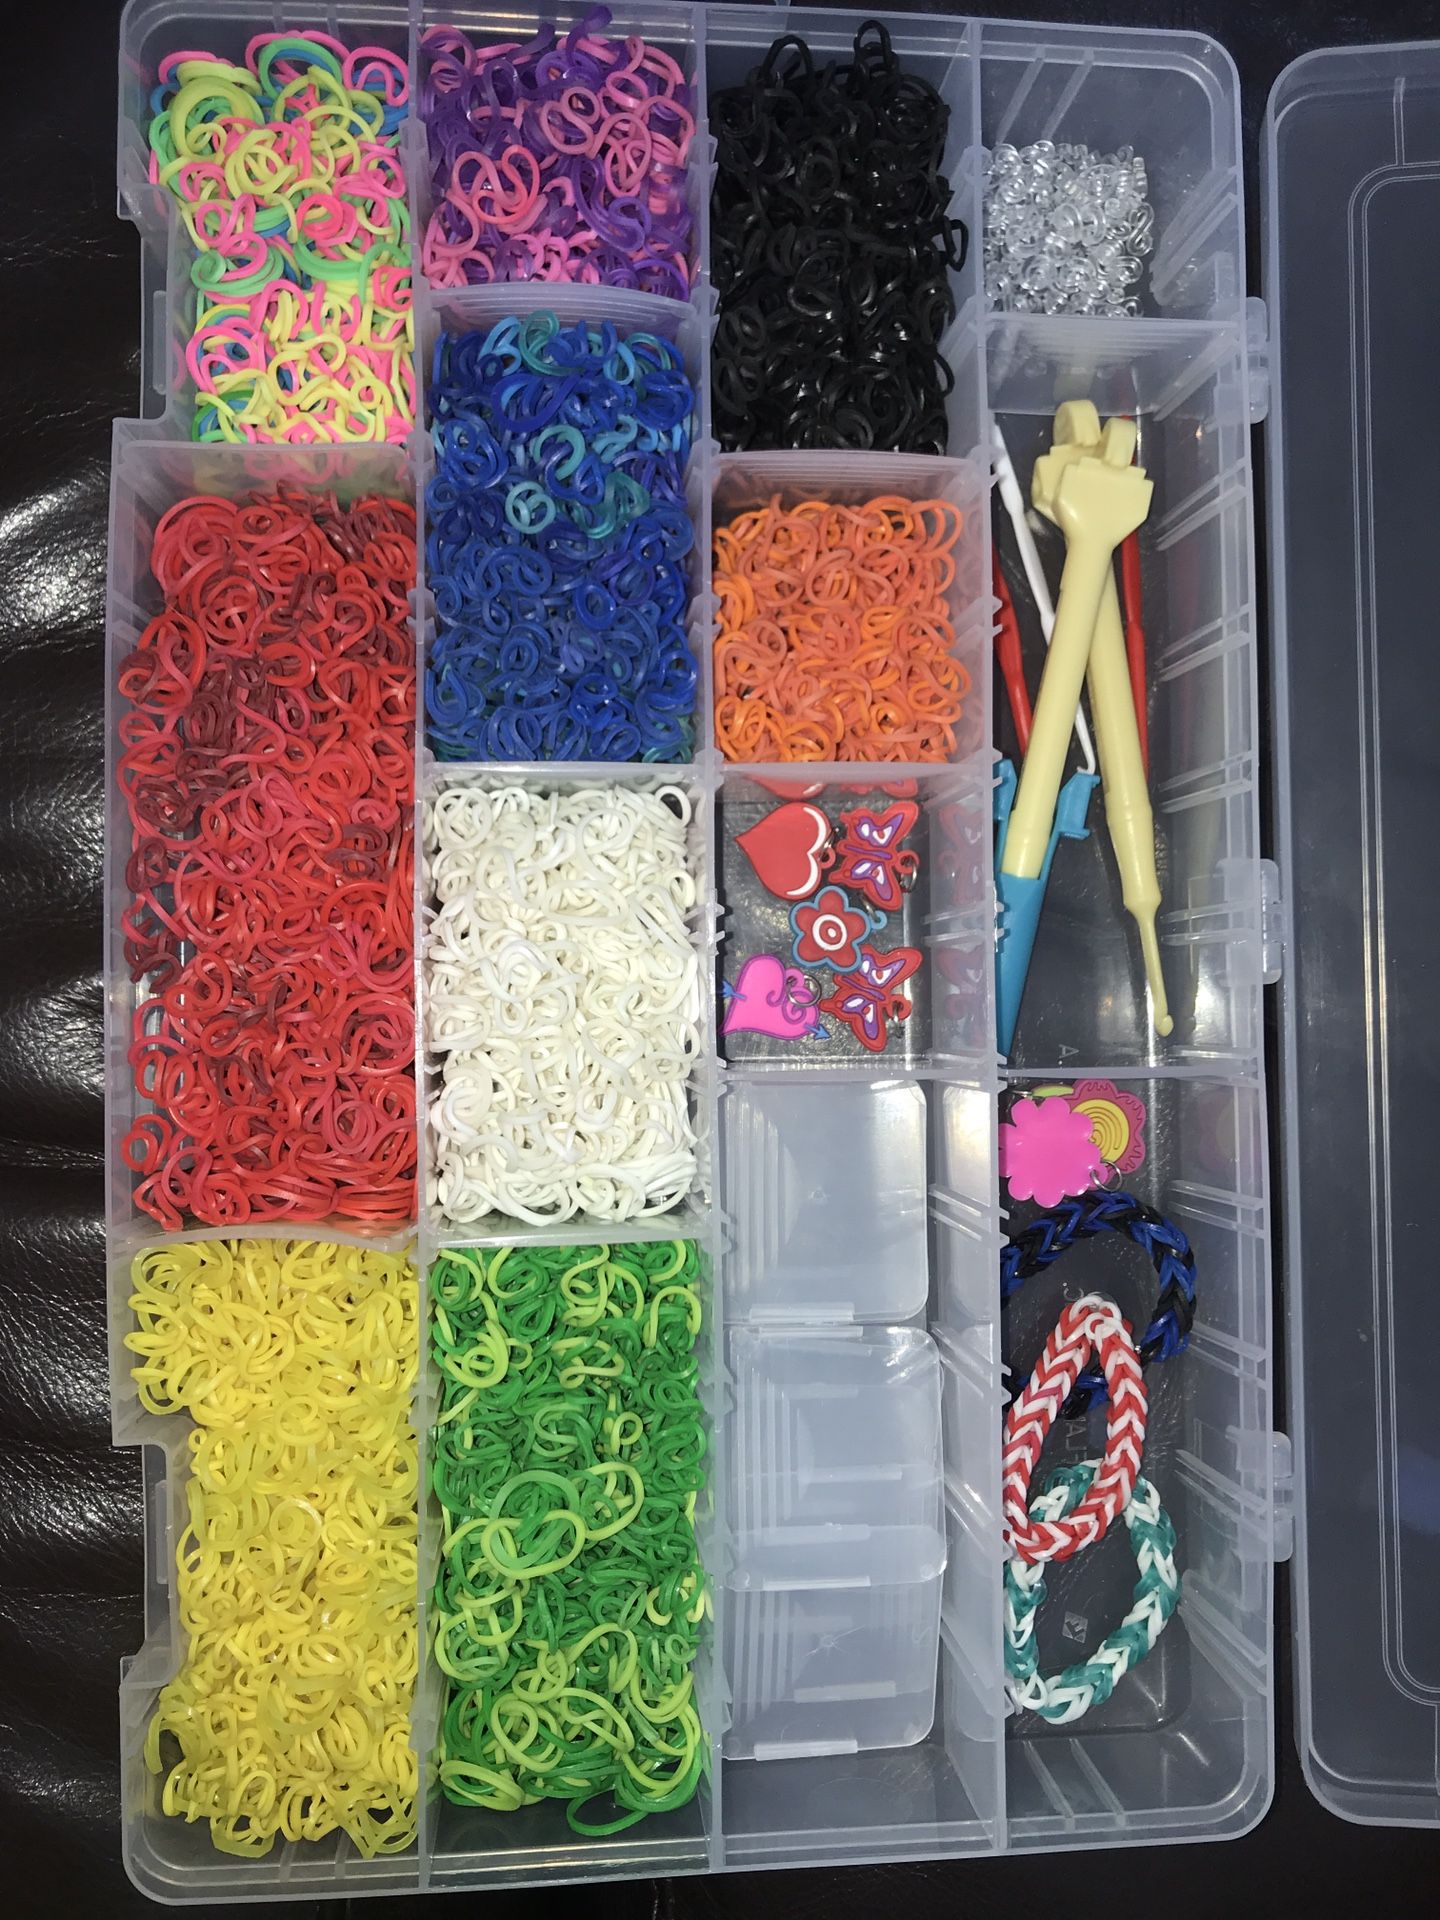 Rainbow loom rubber bands